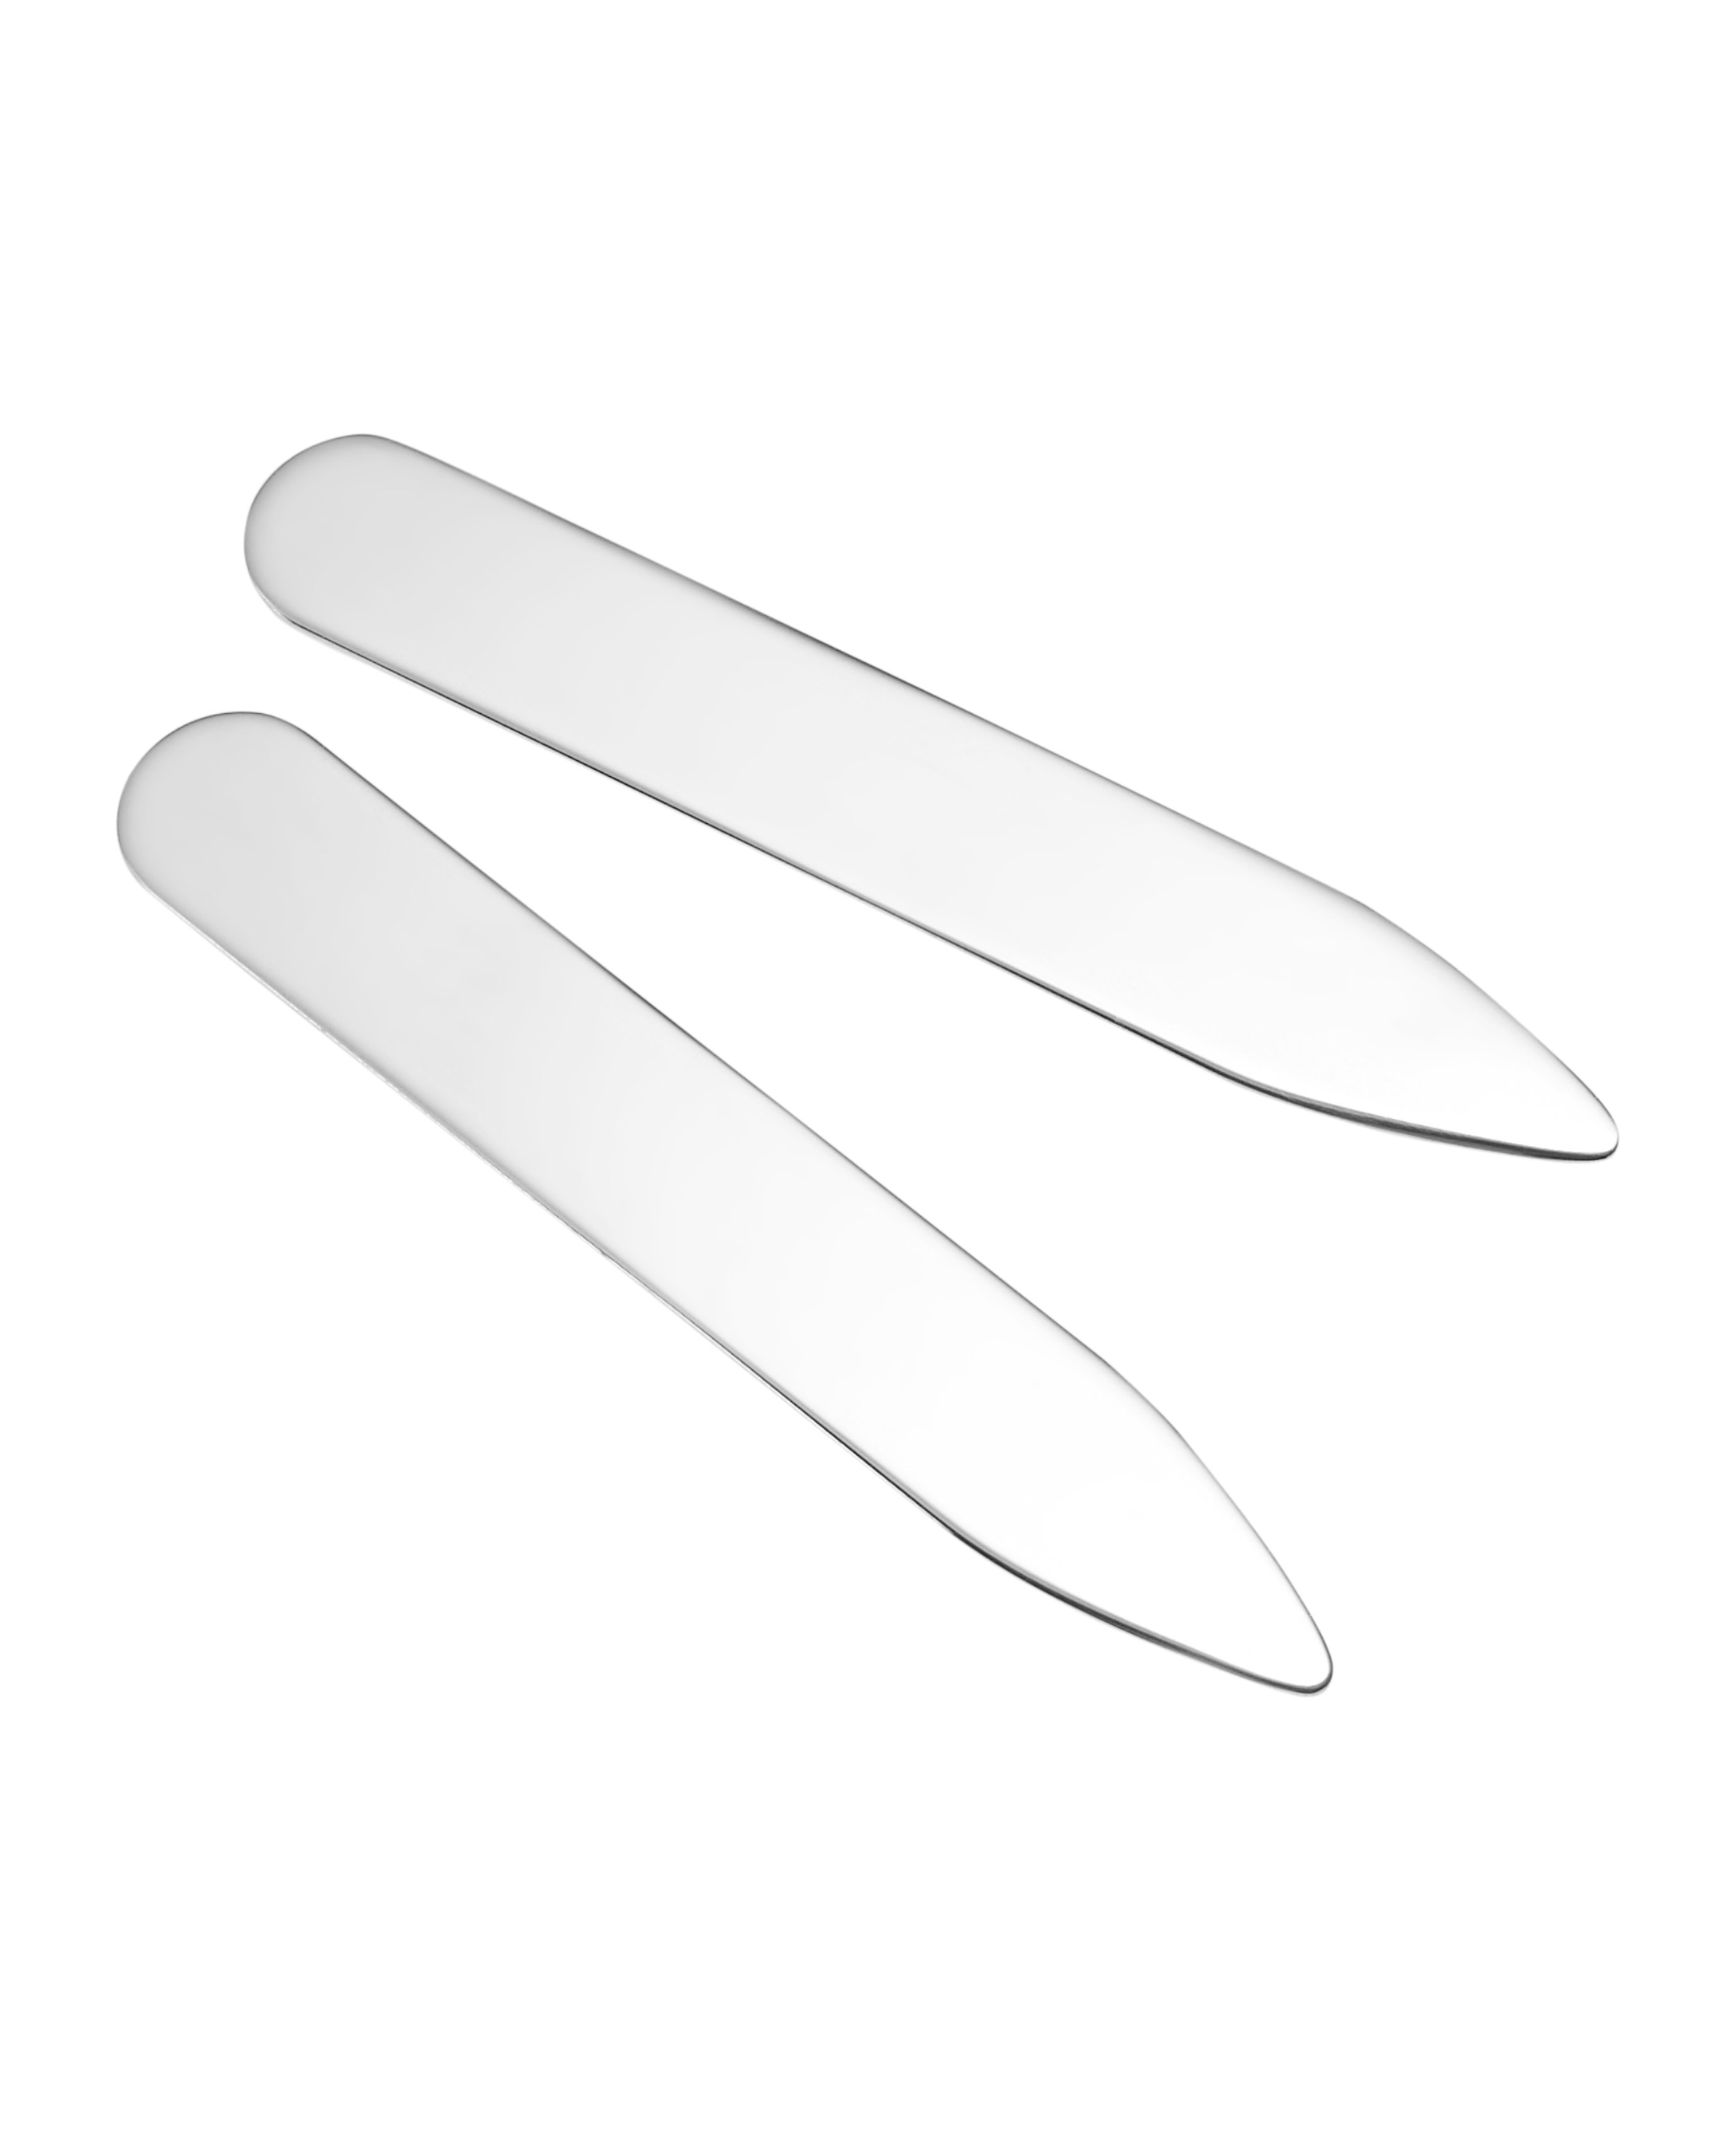 Savile Row Company Engravable Sterling Silver Collar Stiffeners